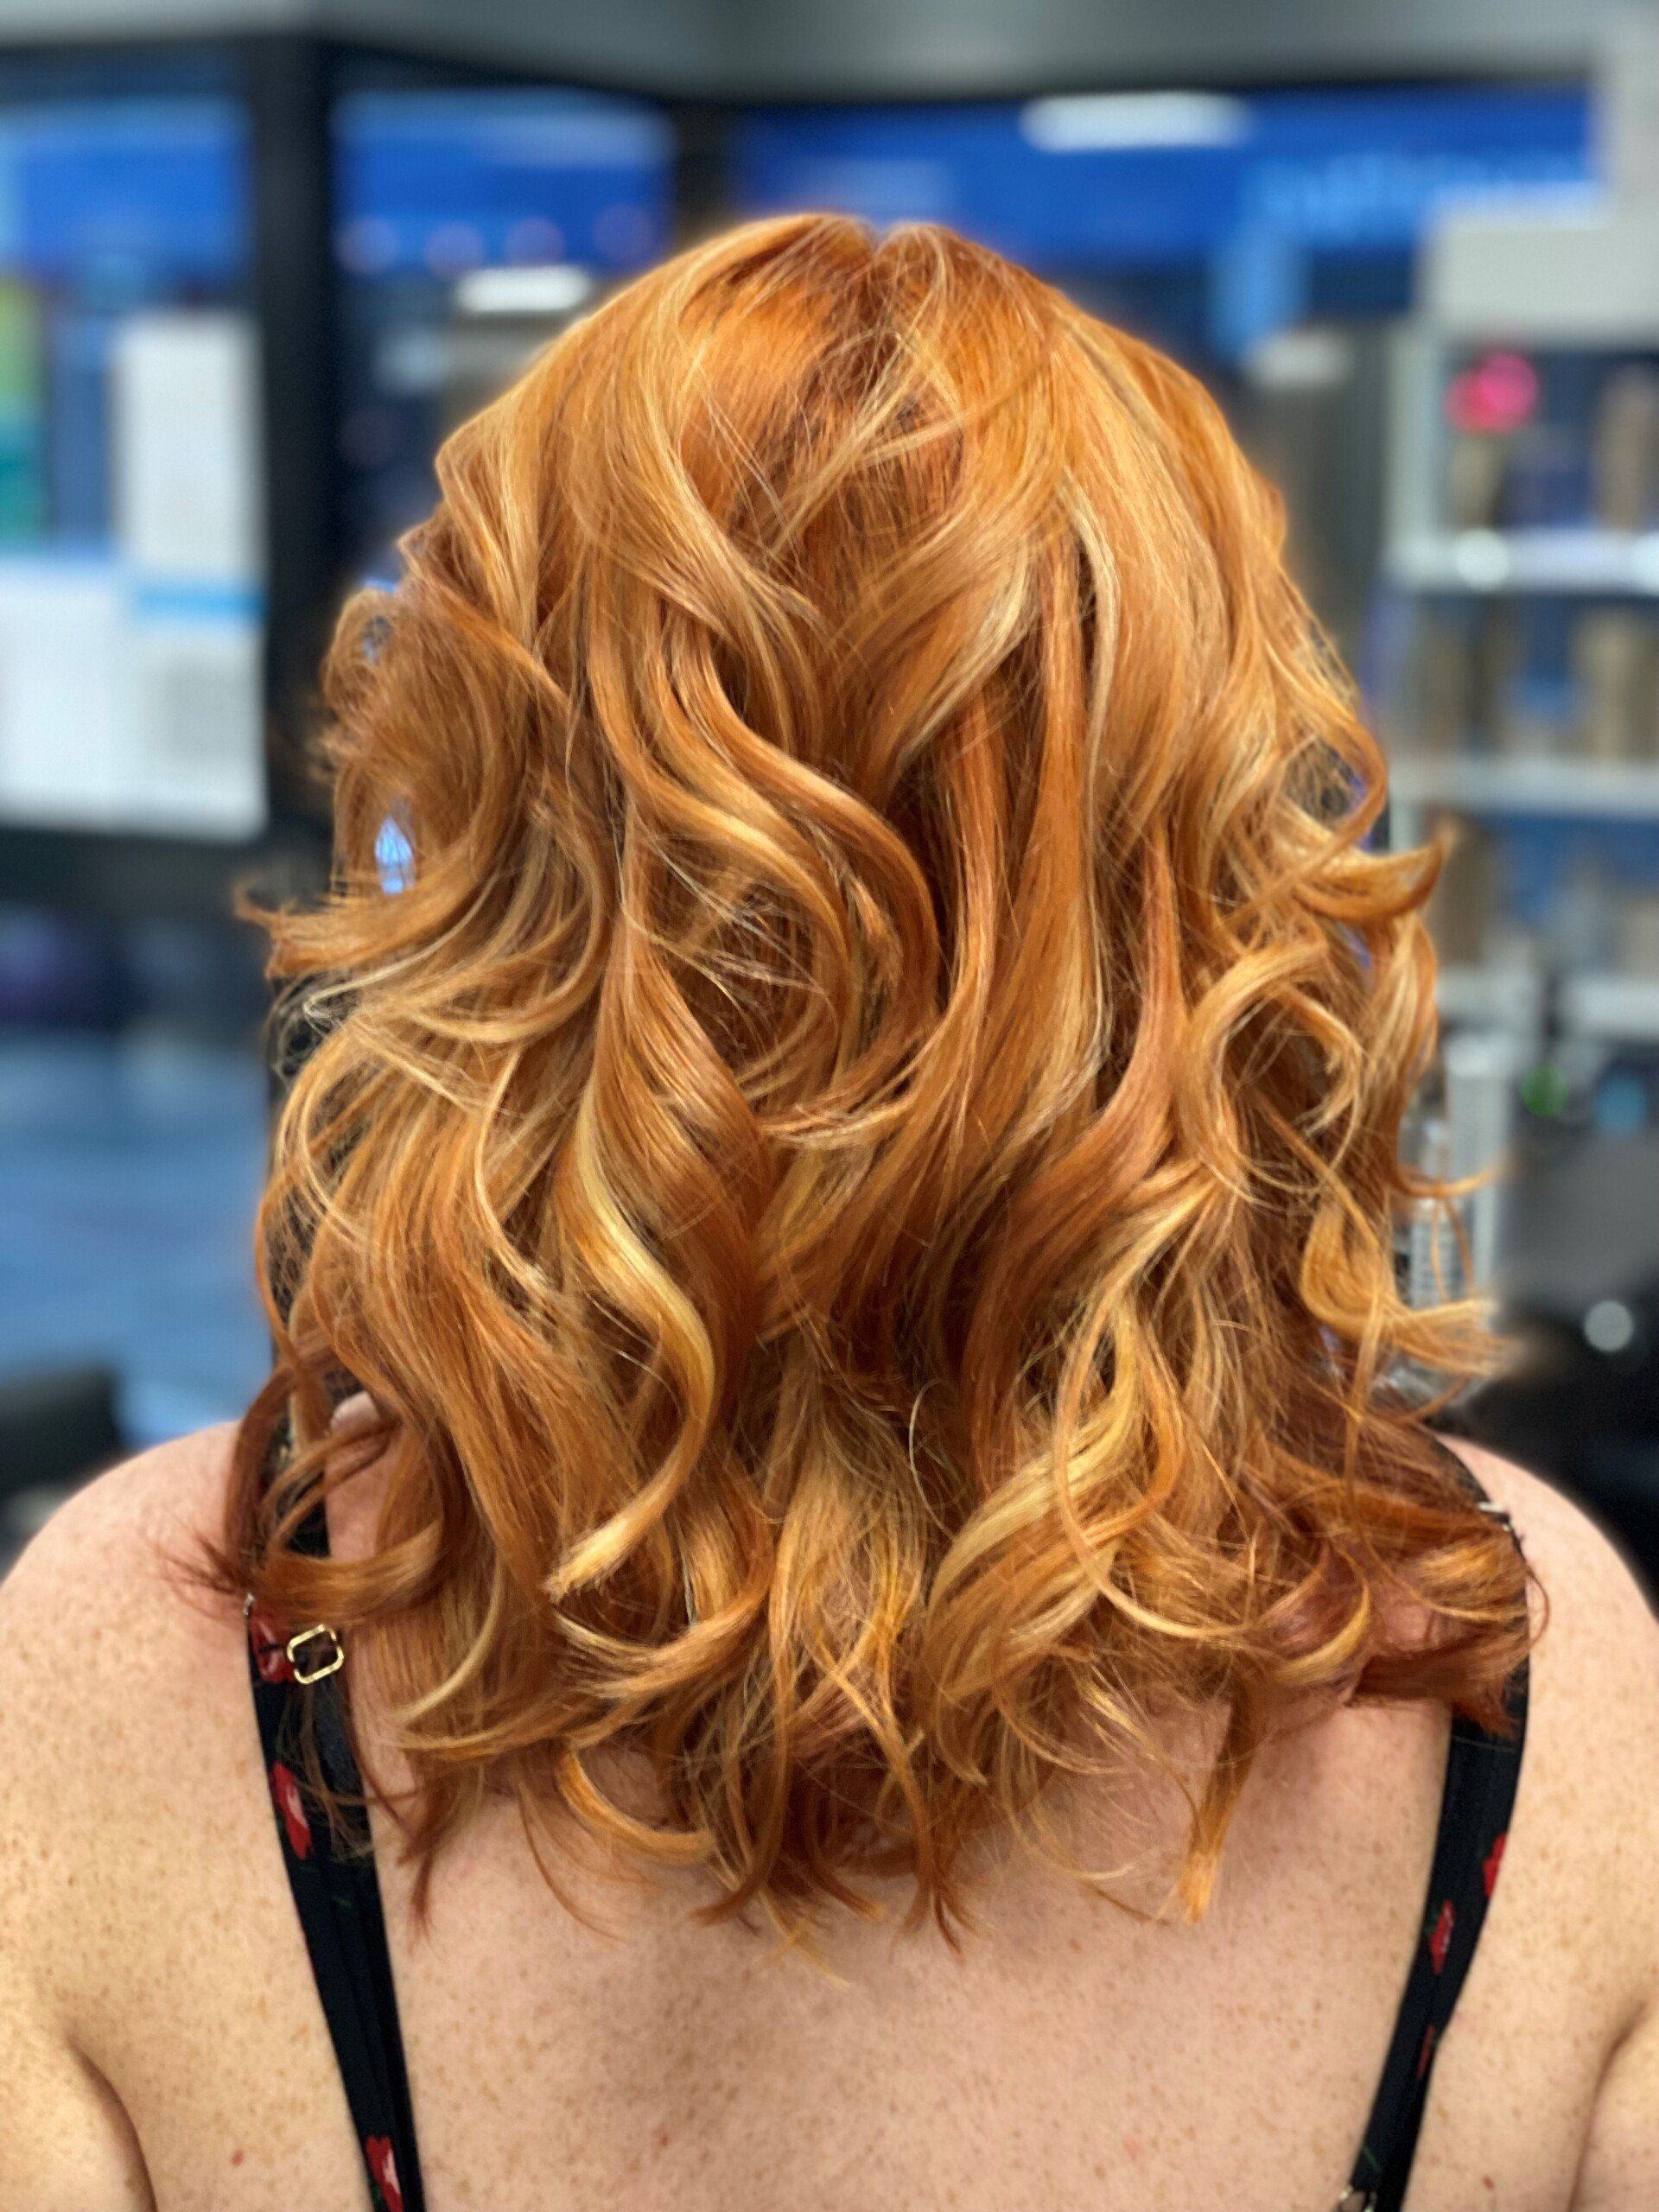 vibrant copper Balayage hair transformation created at Collective Hairdressing